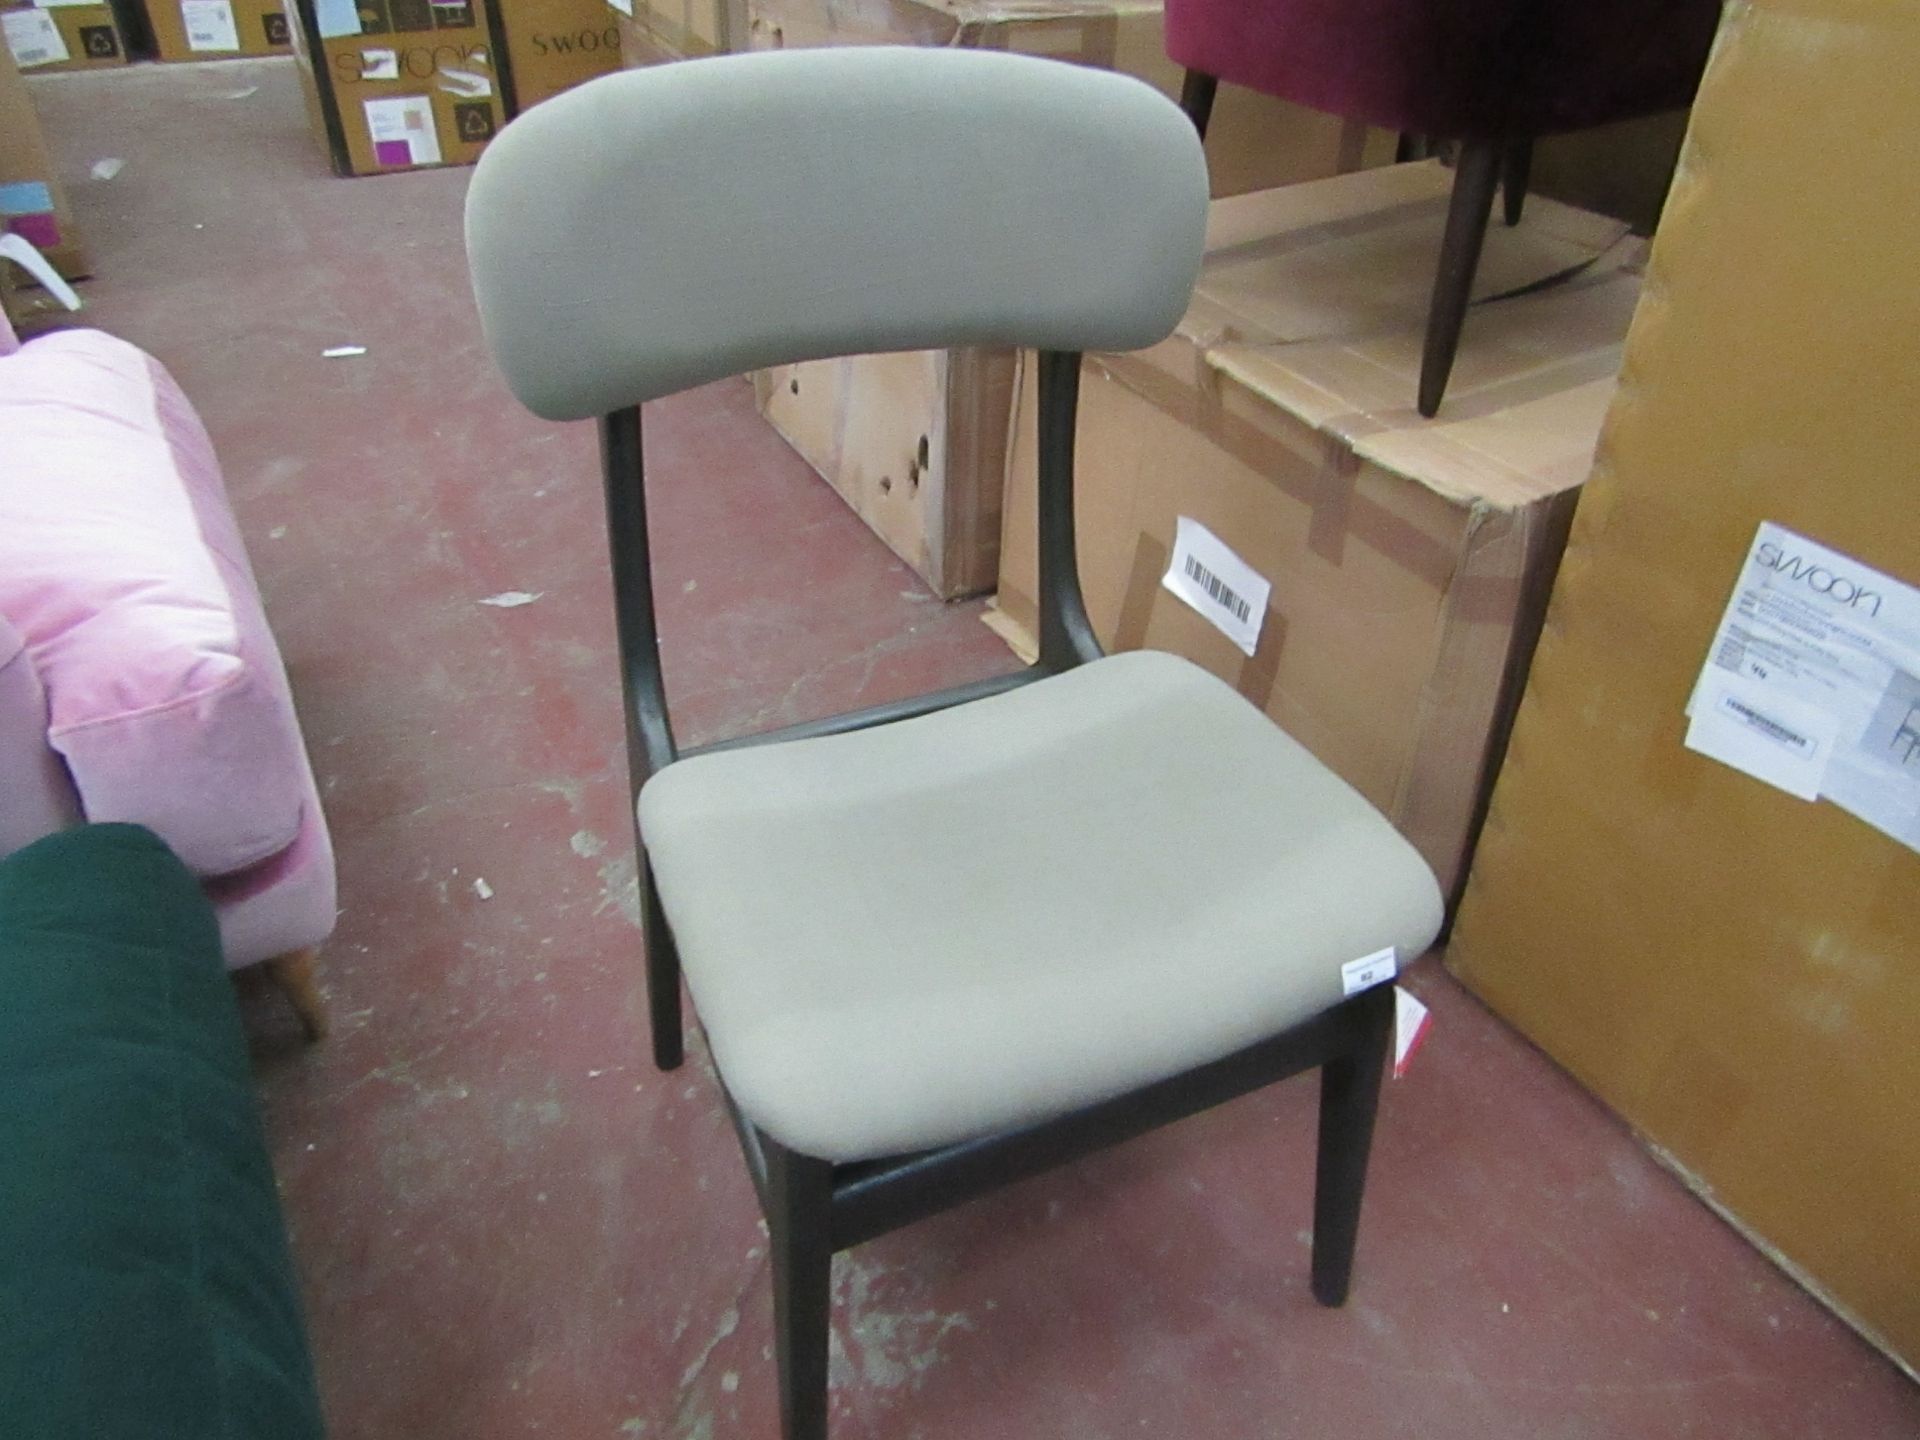 Swoon editions Jaya dining chair in Putty grey, with box, RRP £229, please read lot 0 before